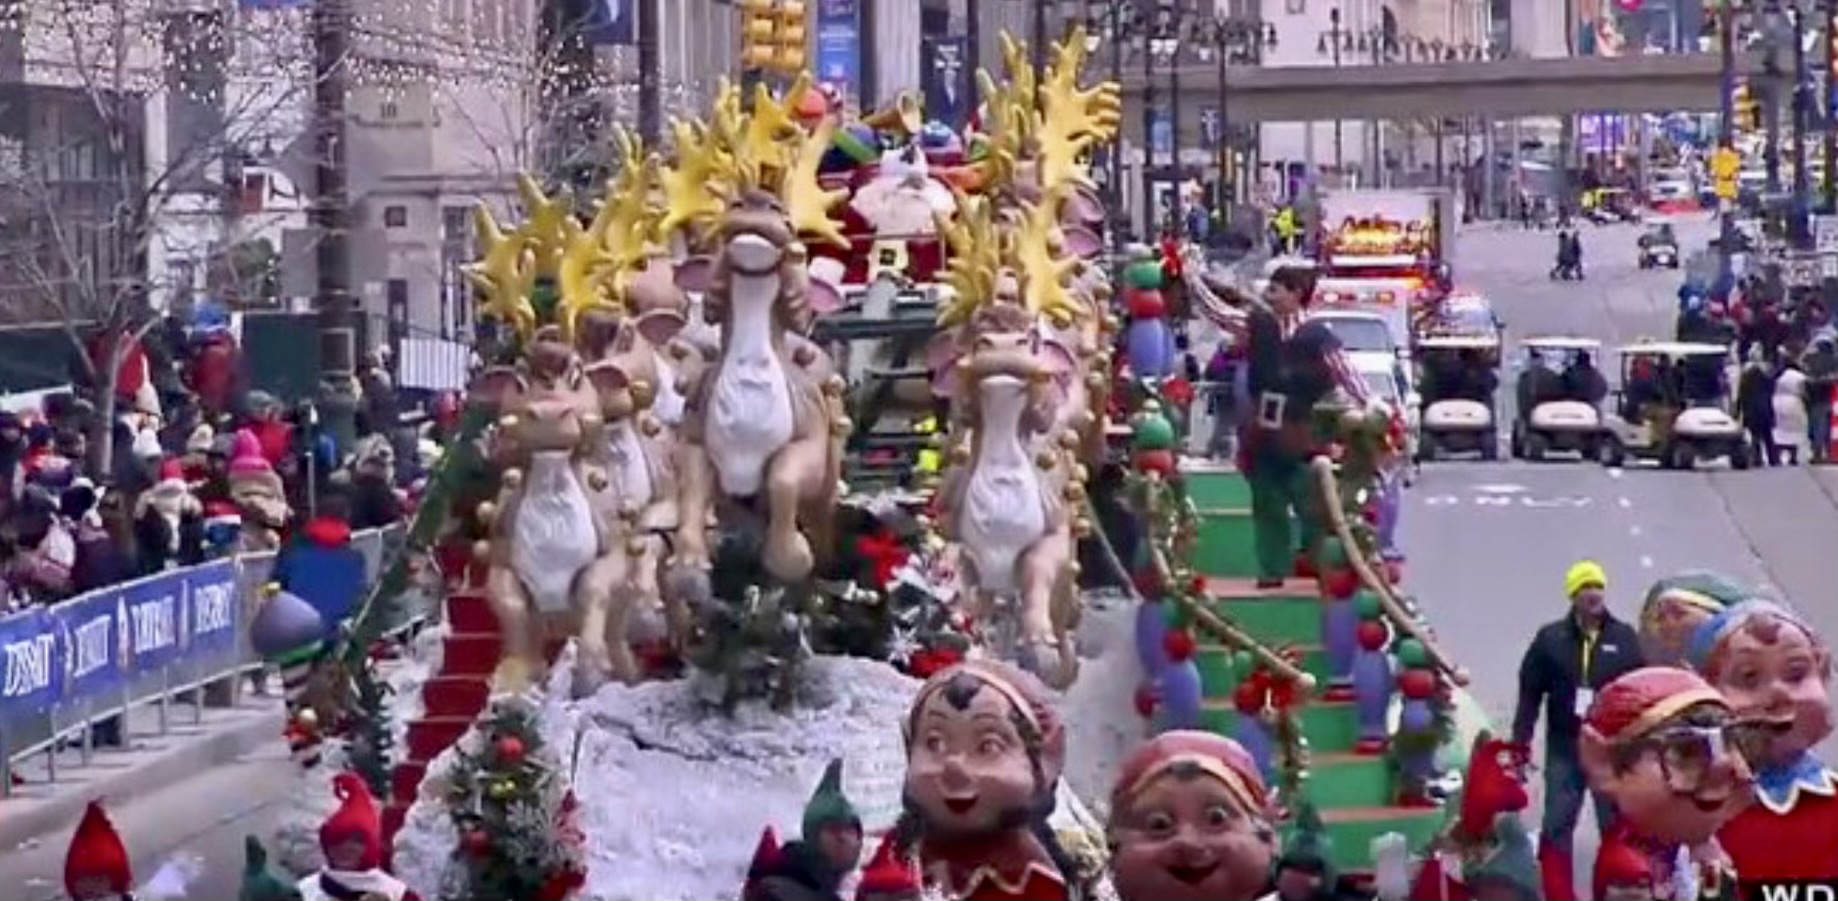 A Christmas parade in a busy street with cars